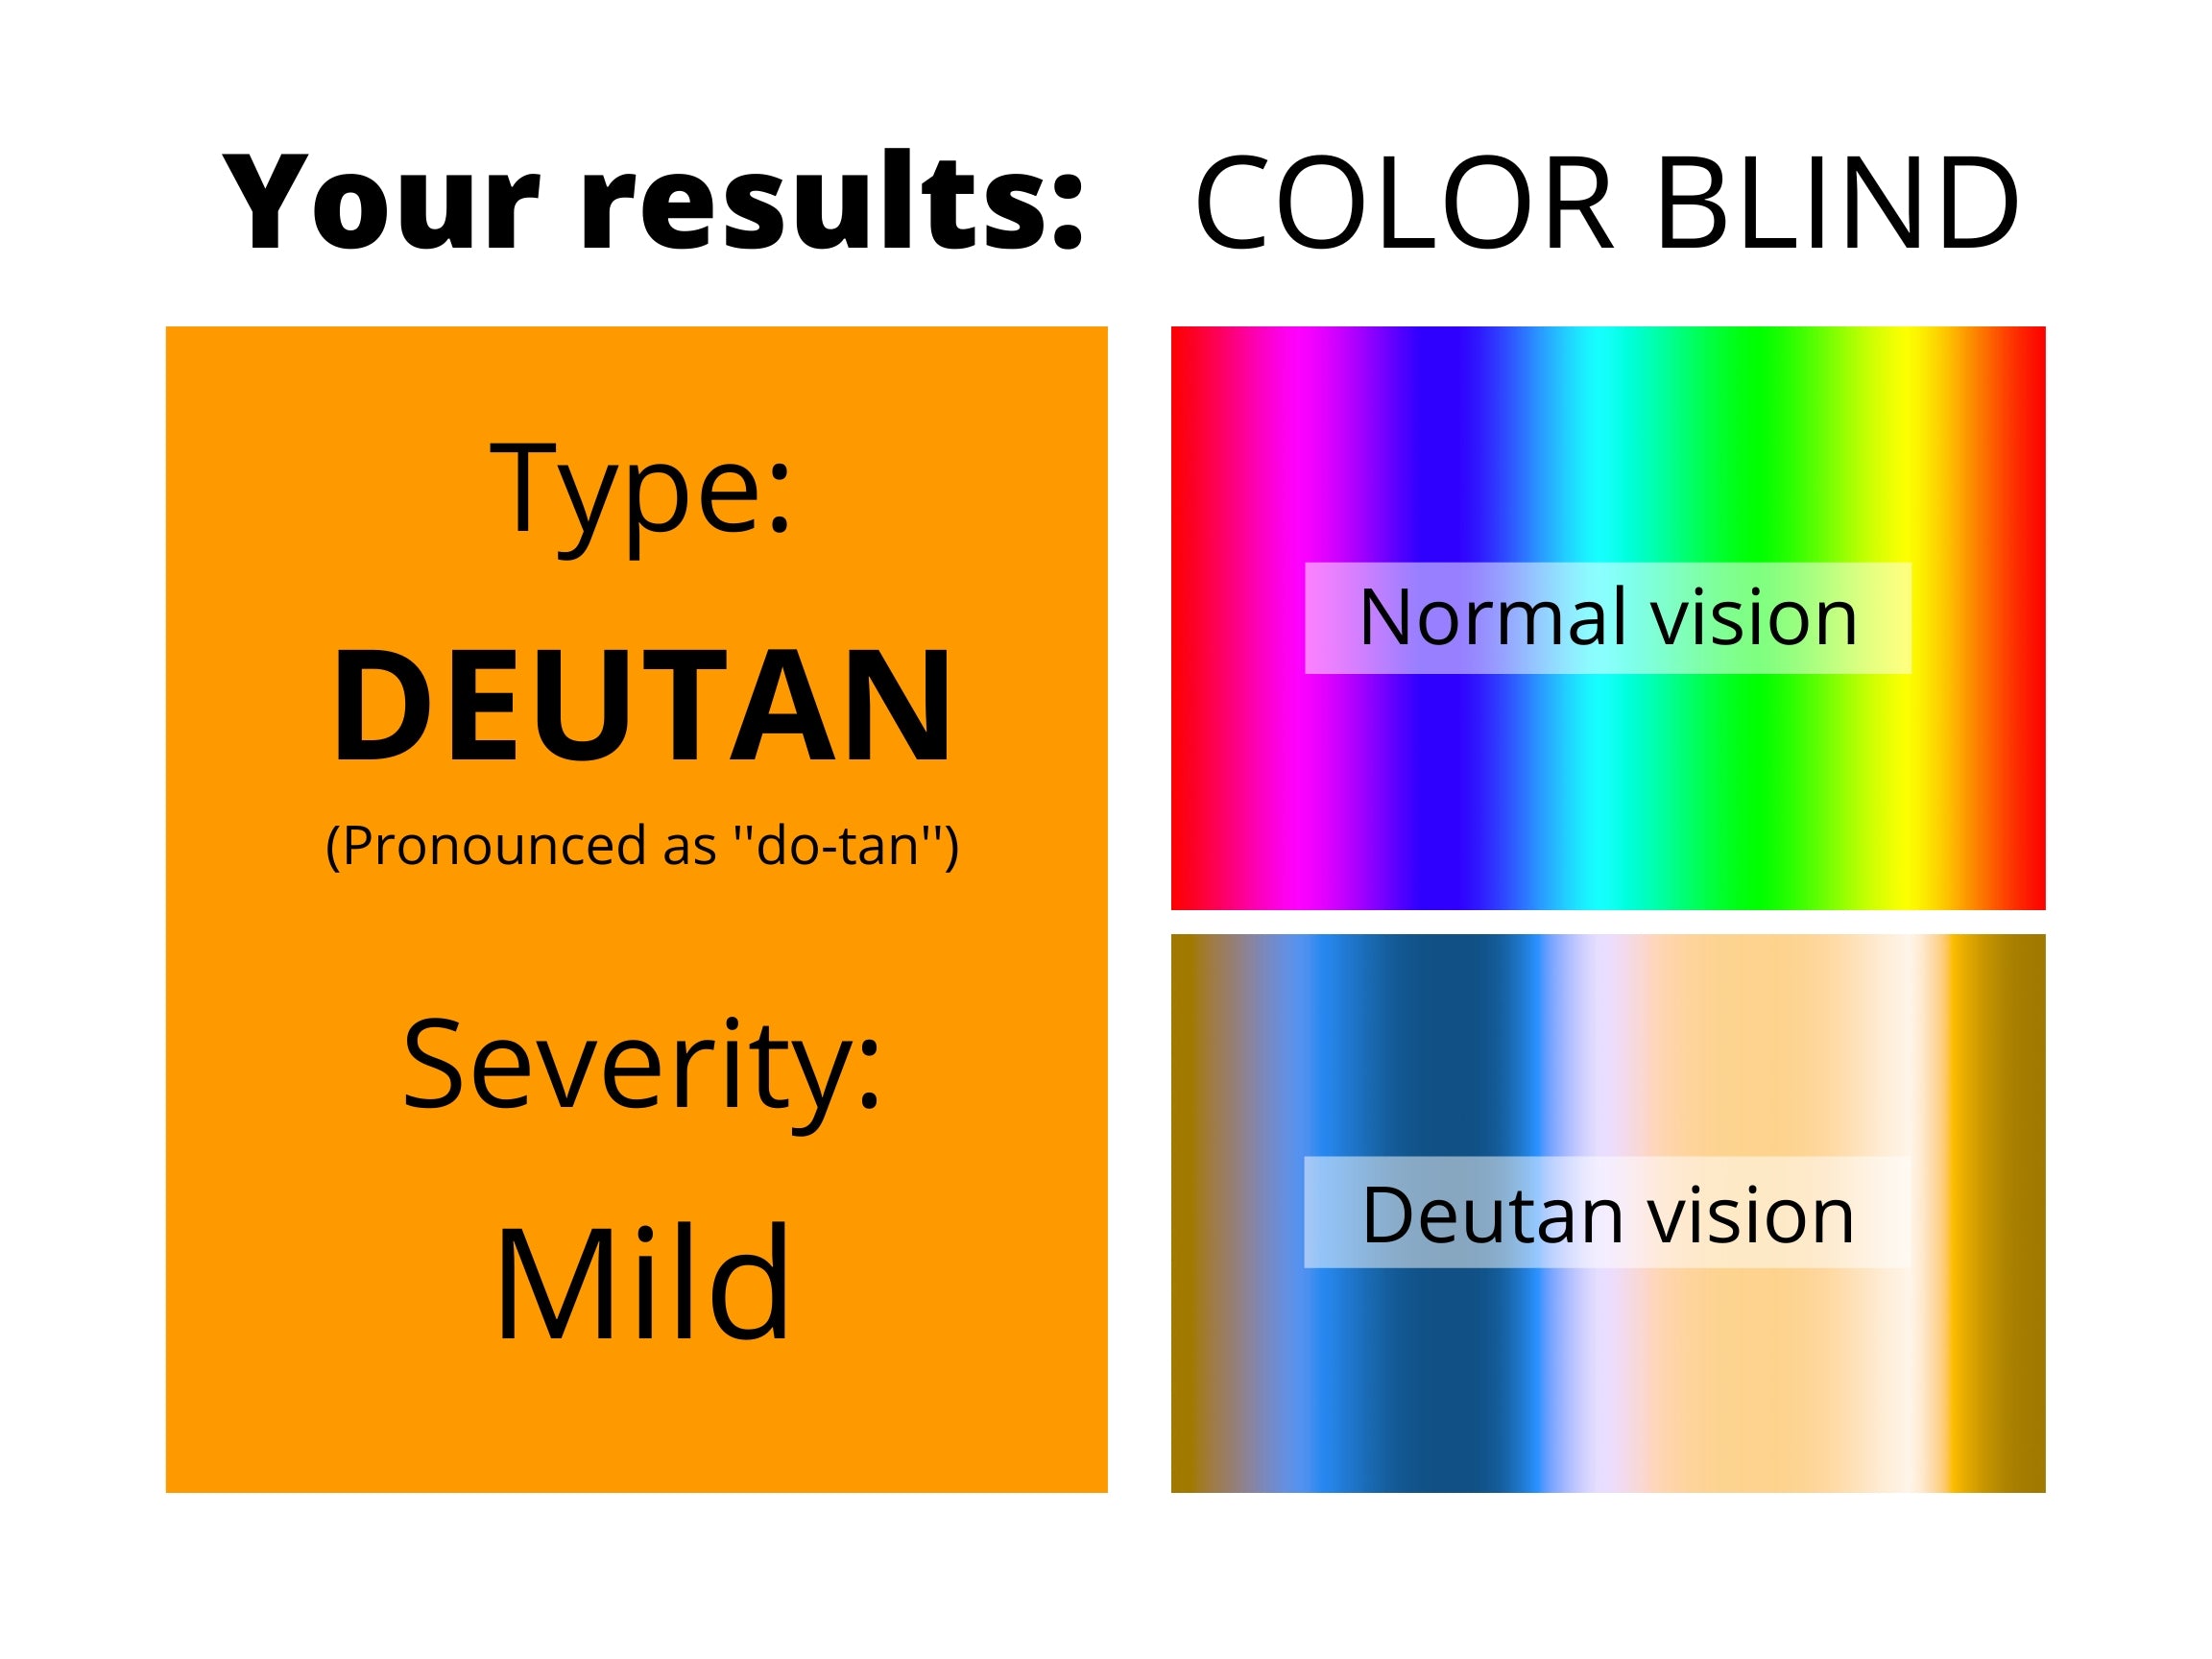 Can you be slightly color blind?